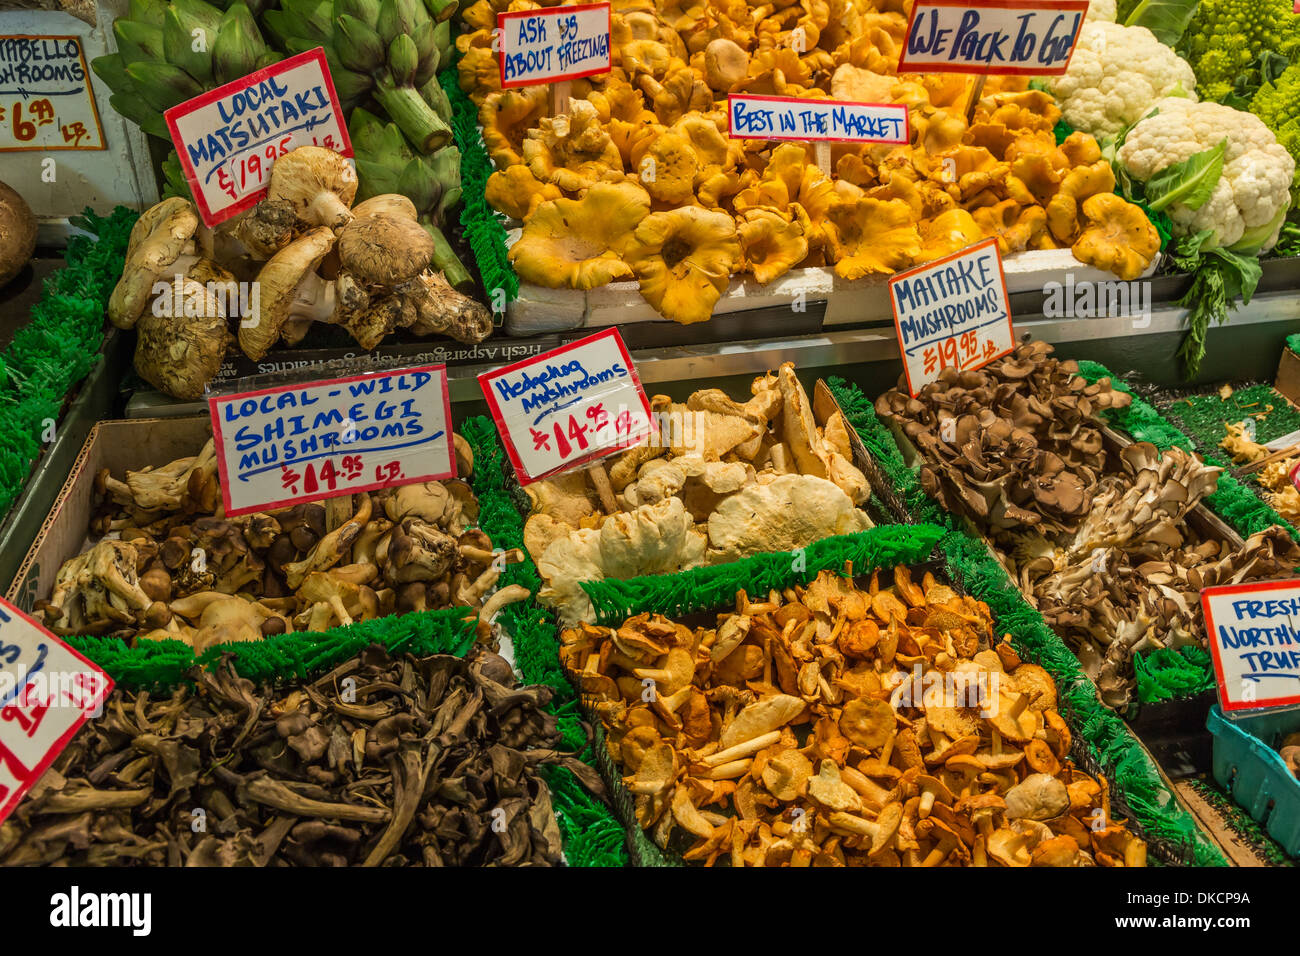 Wild mushrooms for sale in the Pike Place Market in November, Seattle, Washington State, USA Stock Photo